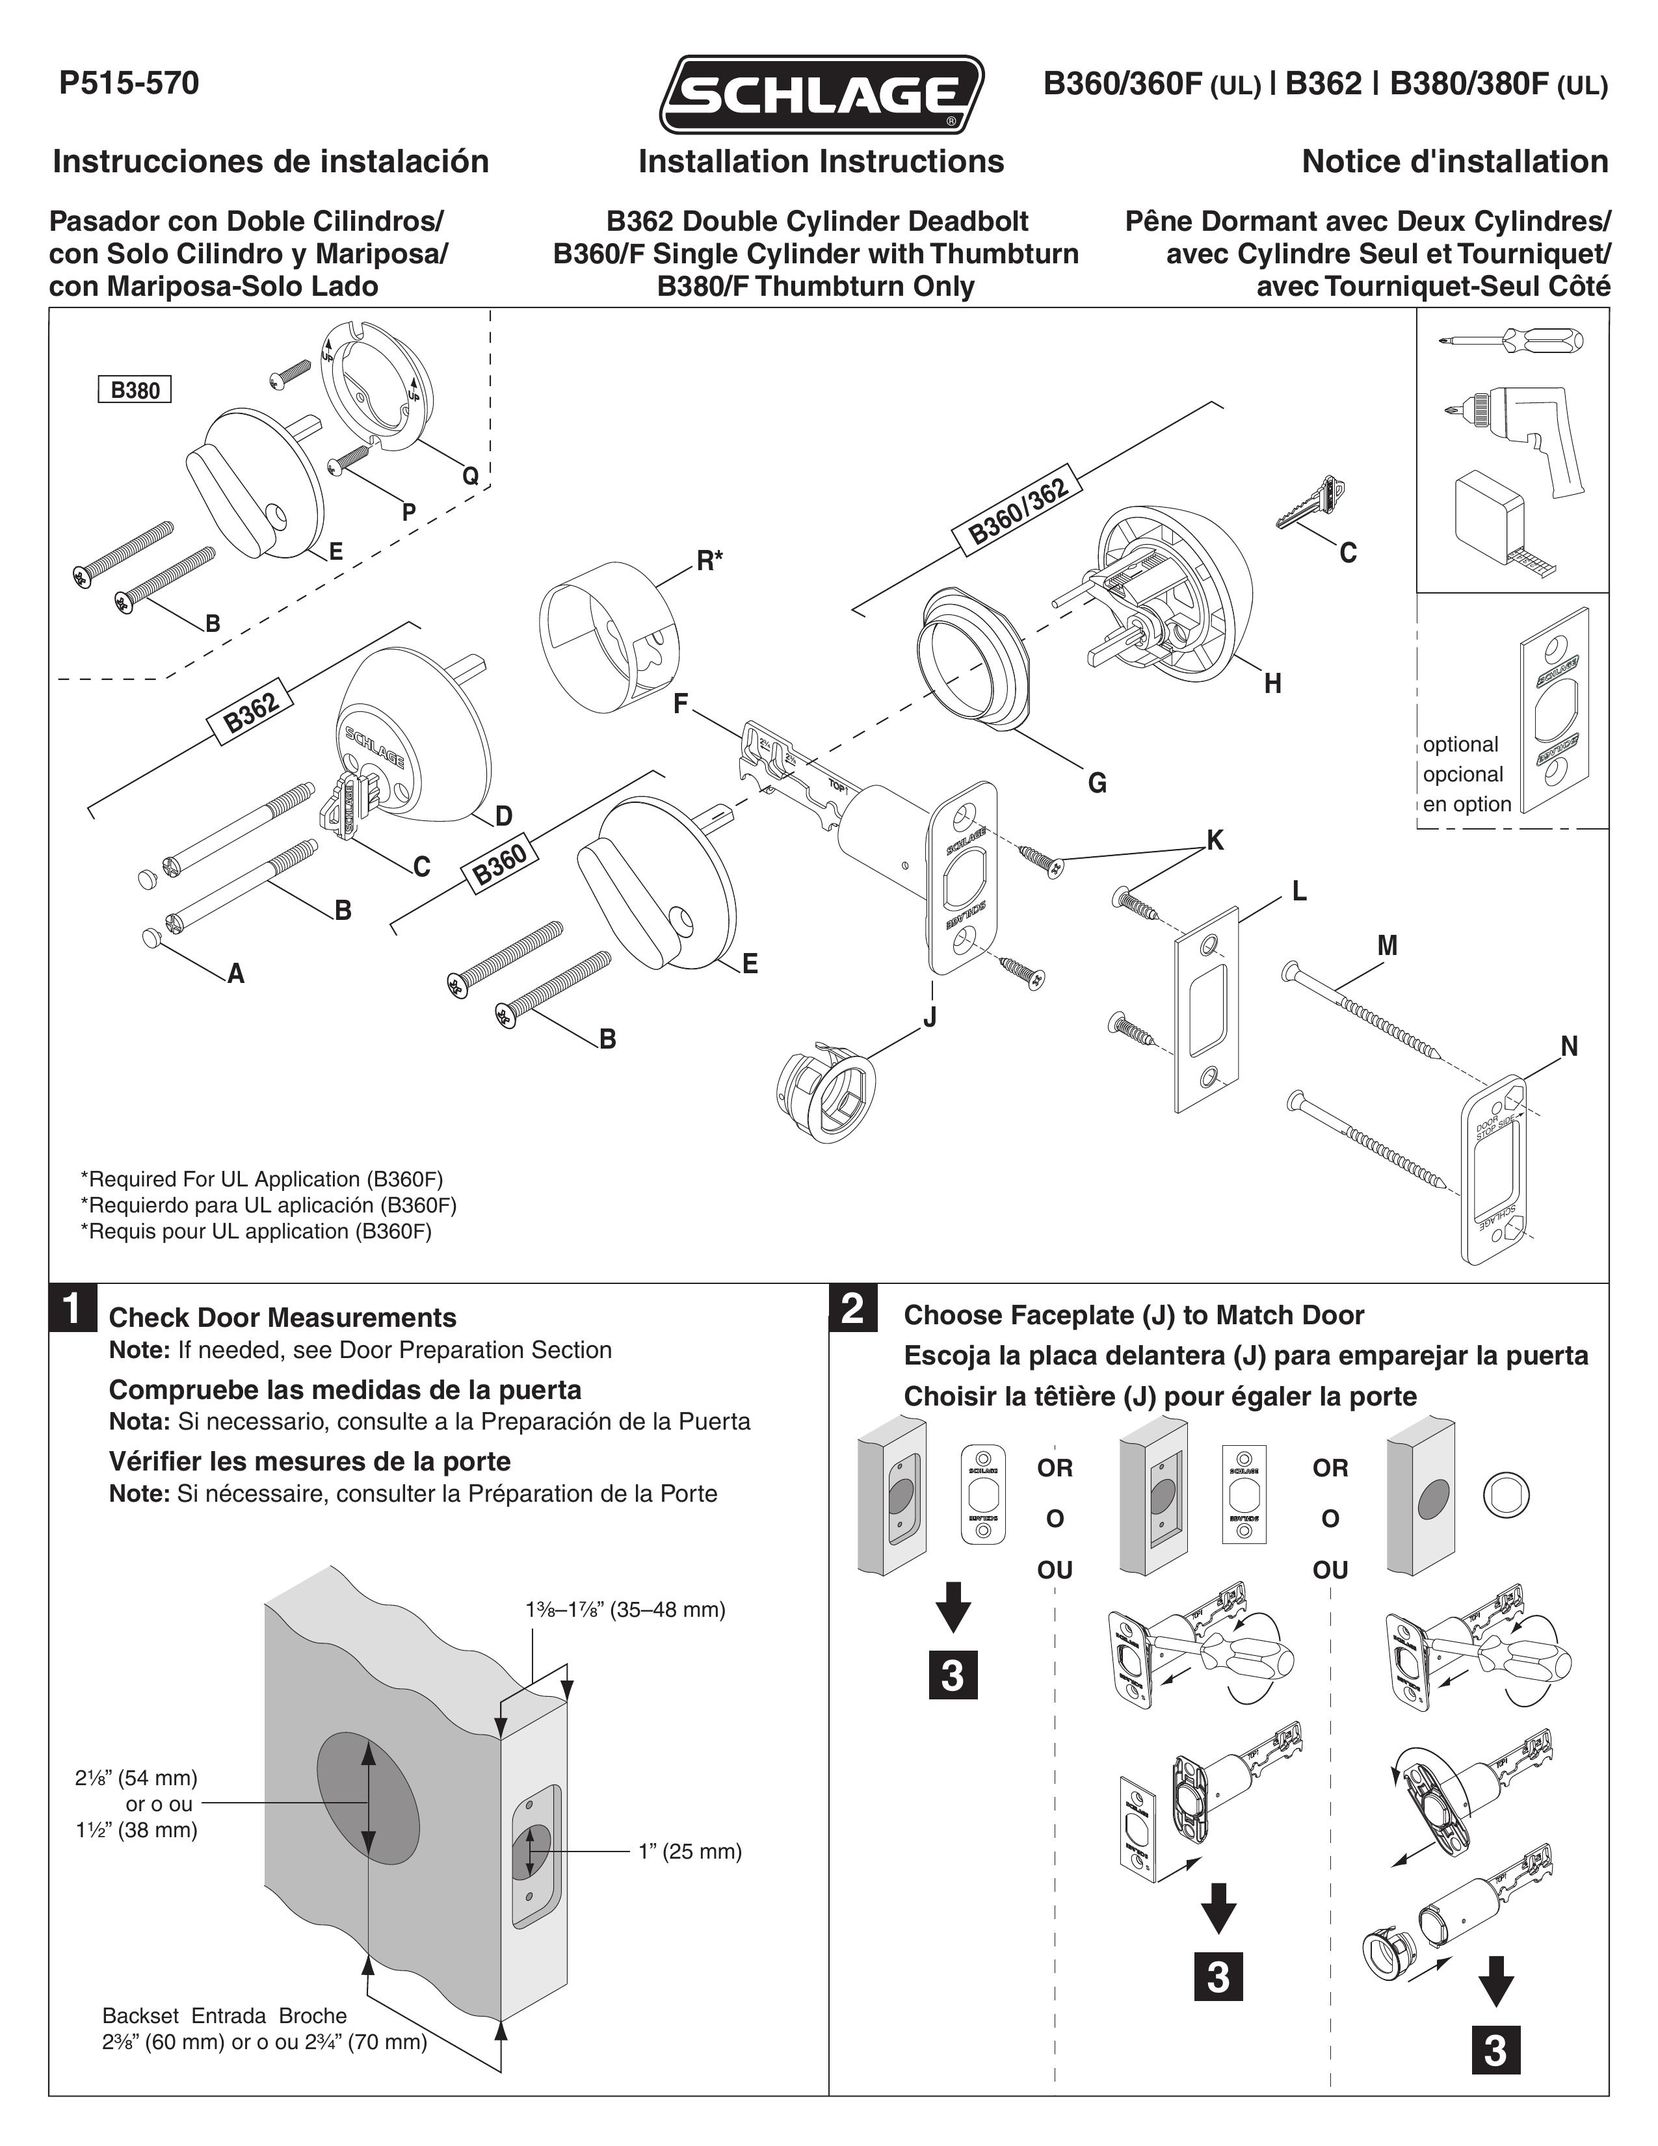 Schlage B360/F Home Security System User Manual